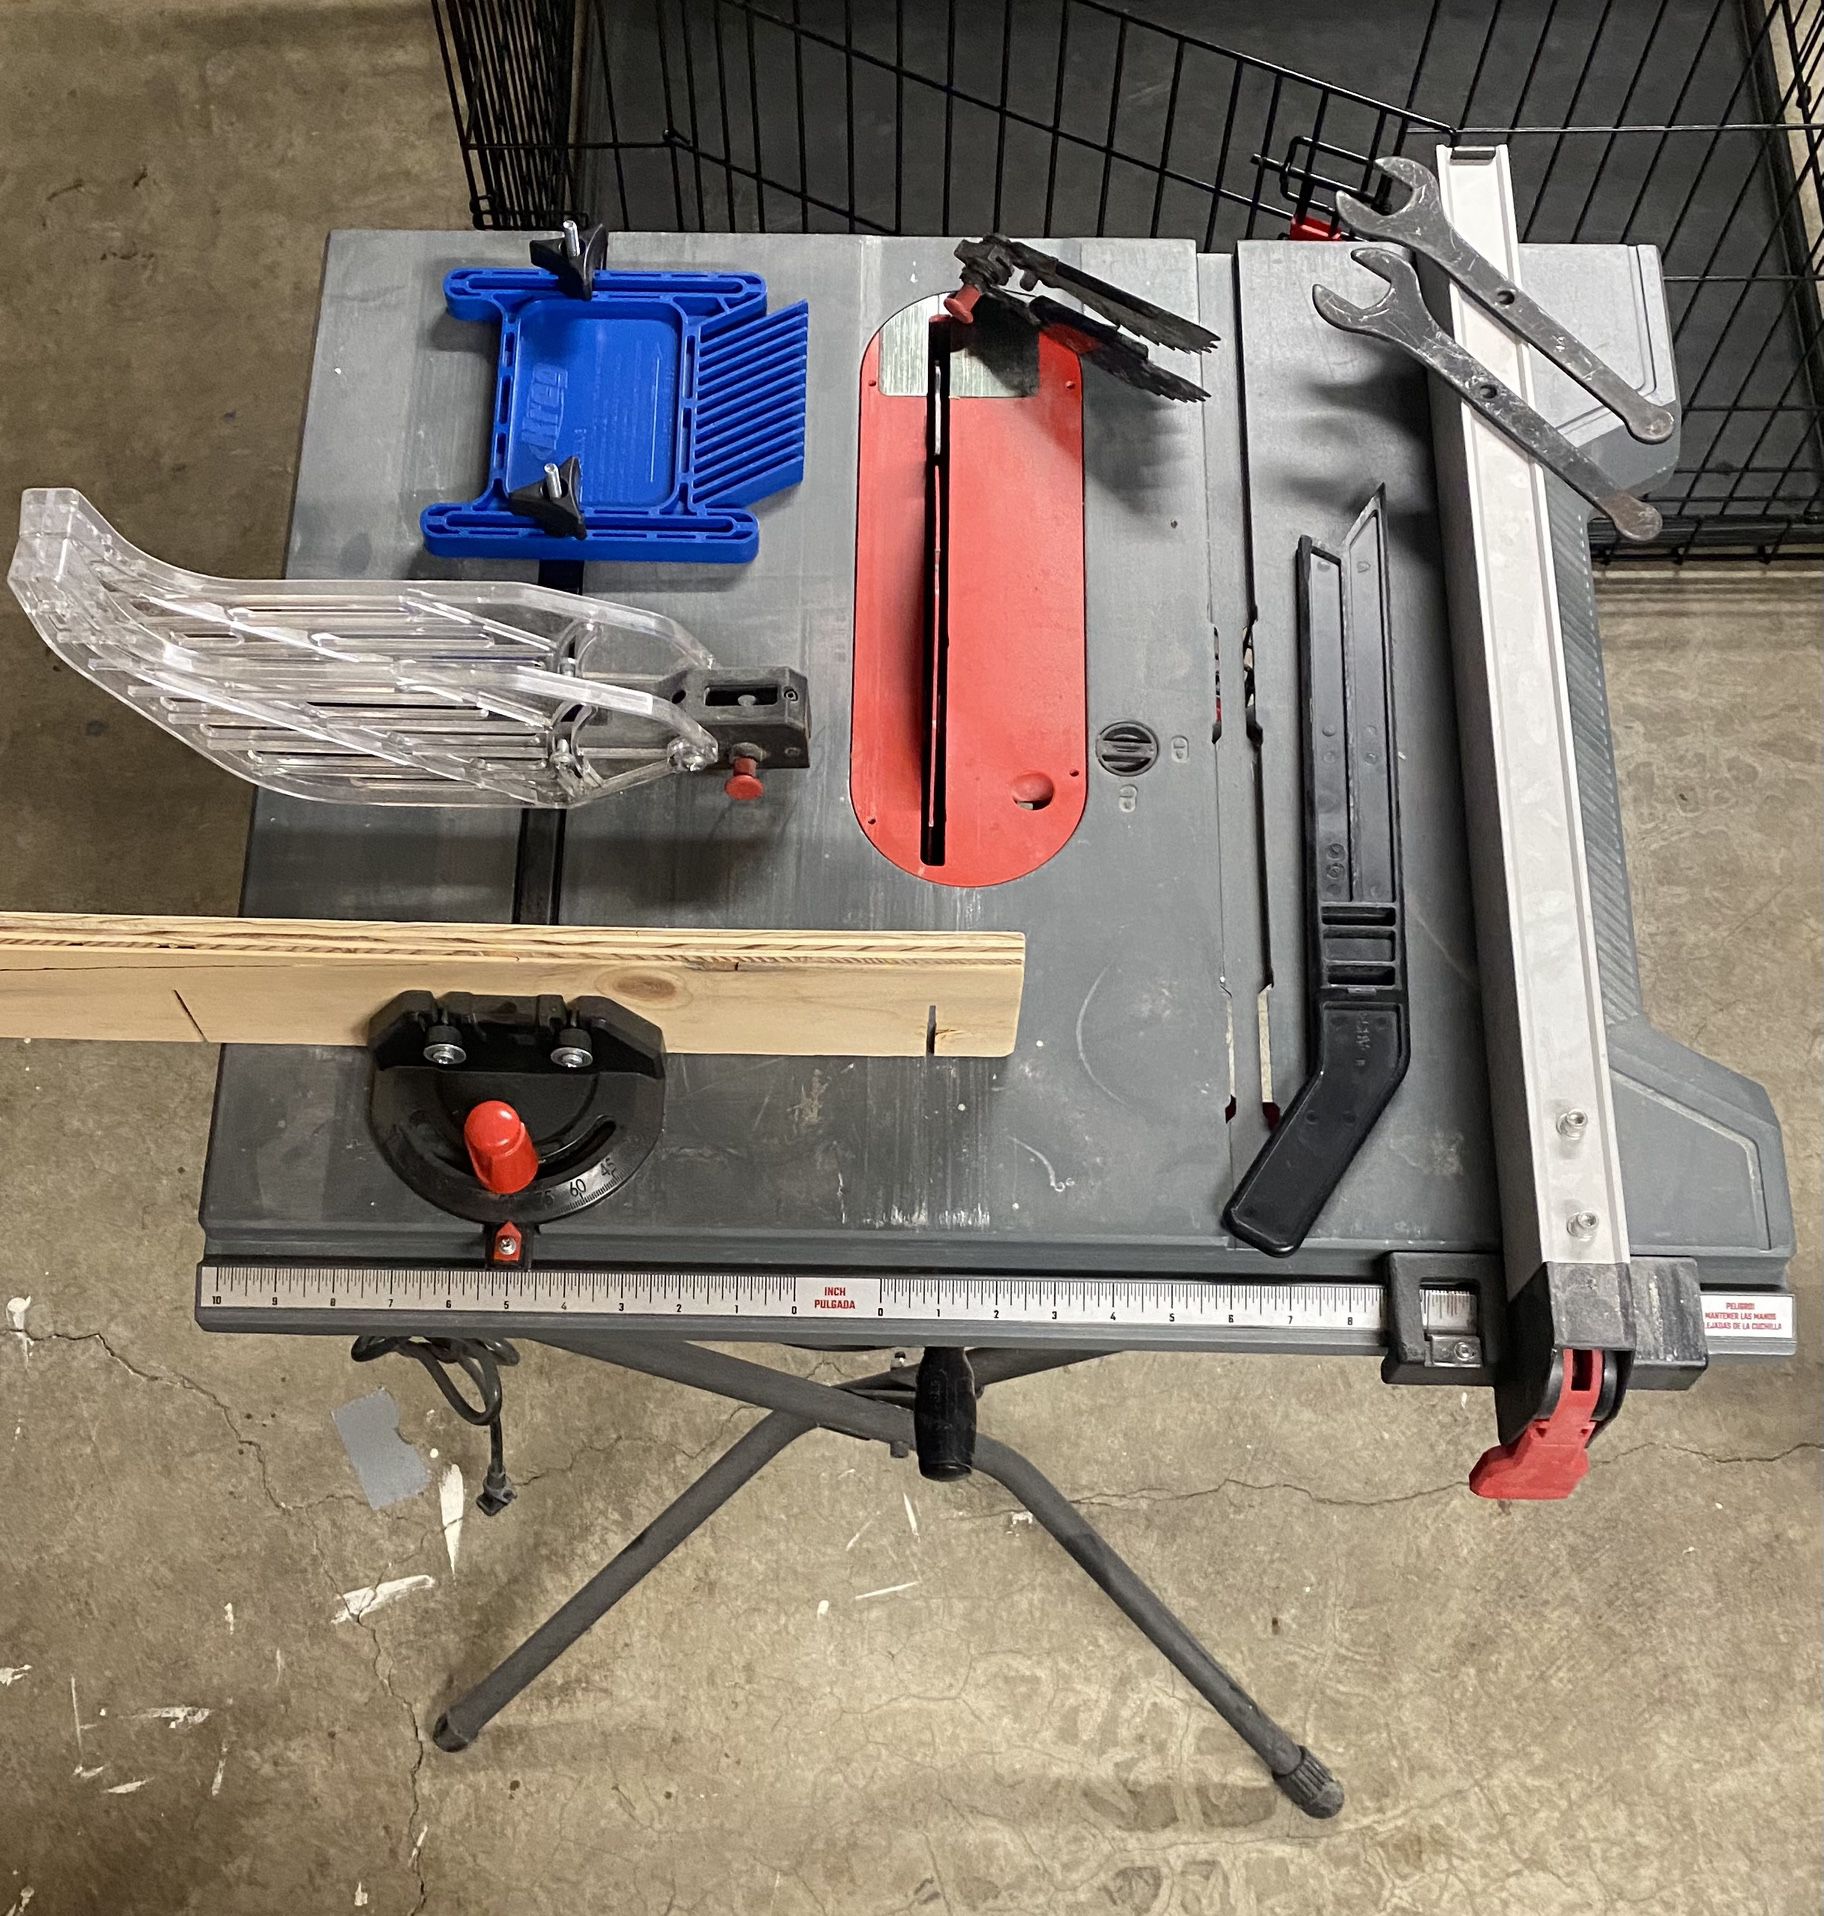 Craftsman 10in Jobsite Table Saw w/ Associated Equipment 